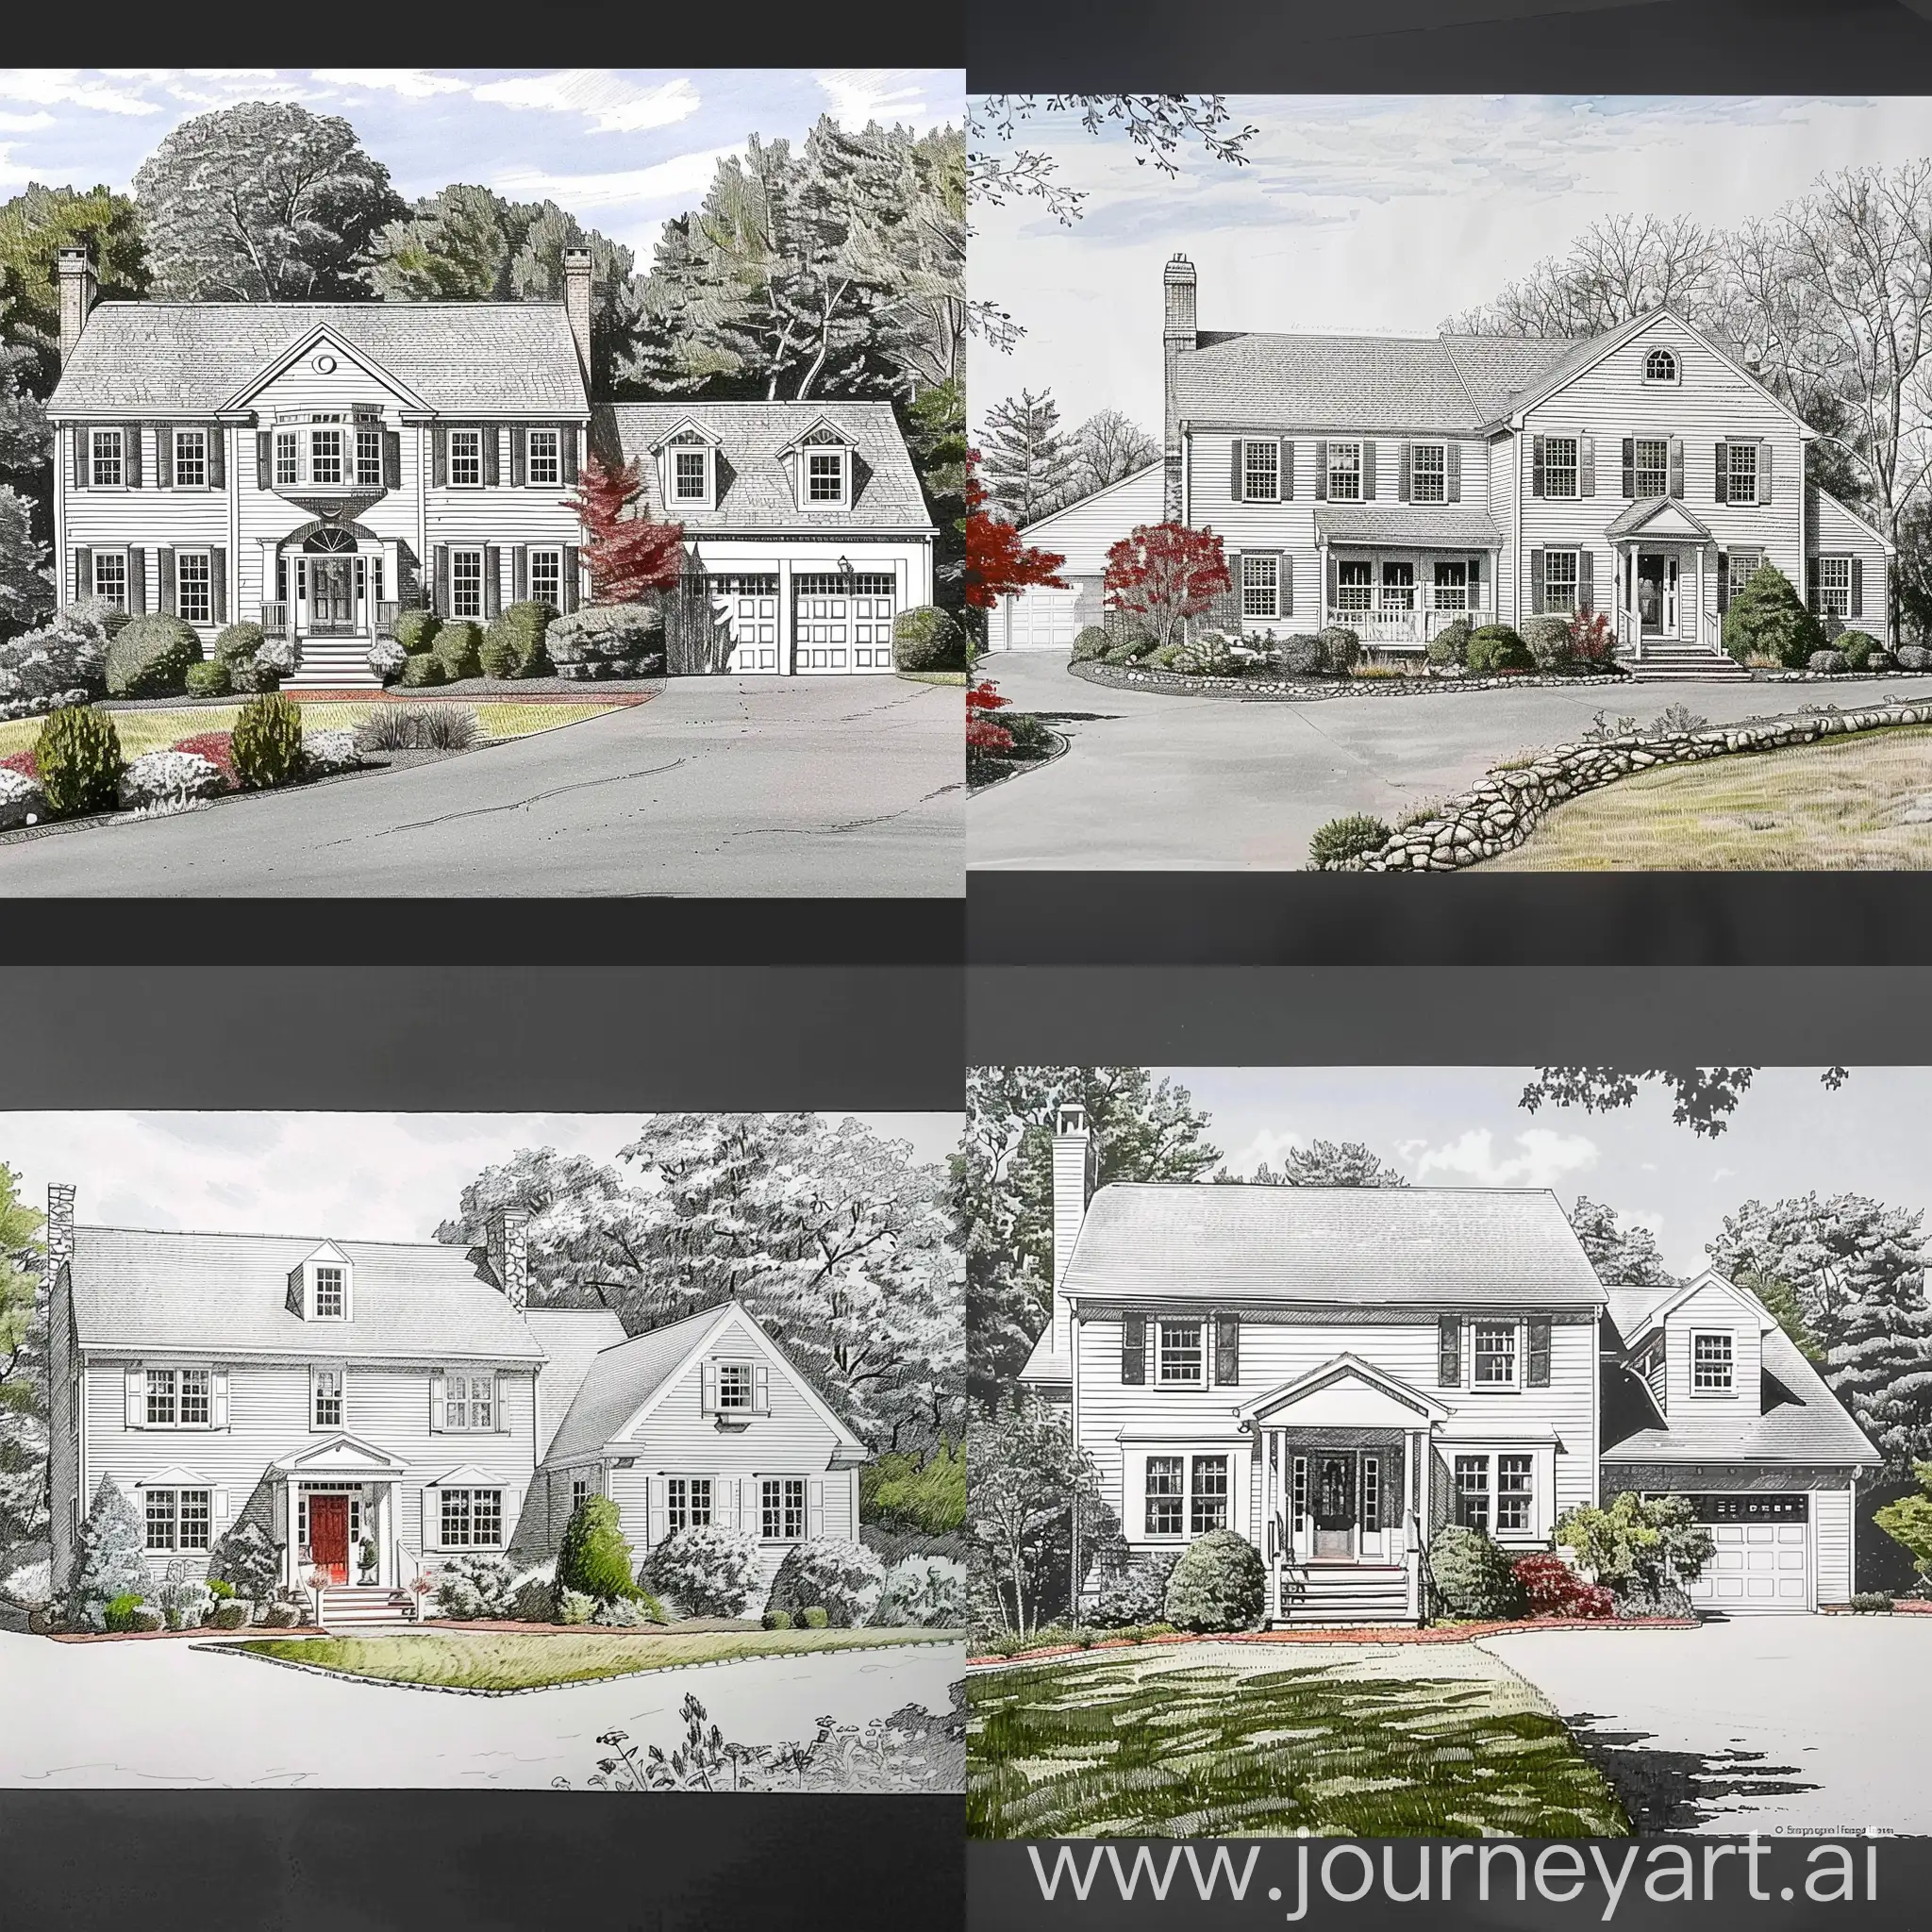 sketch the house at 28 country lane, bethany, CT in black and white.